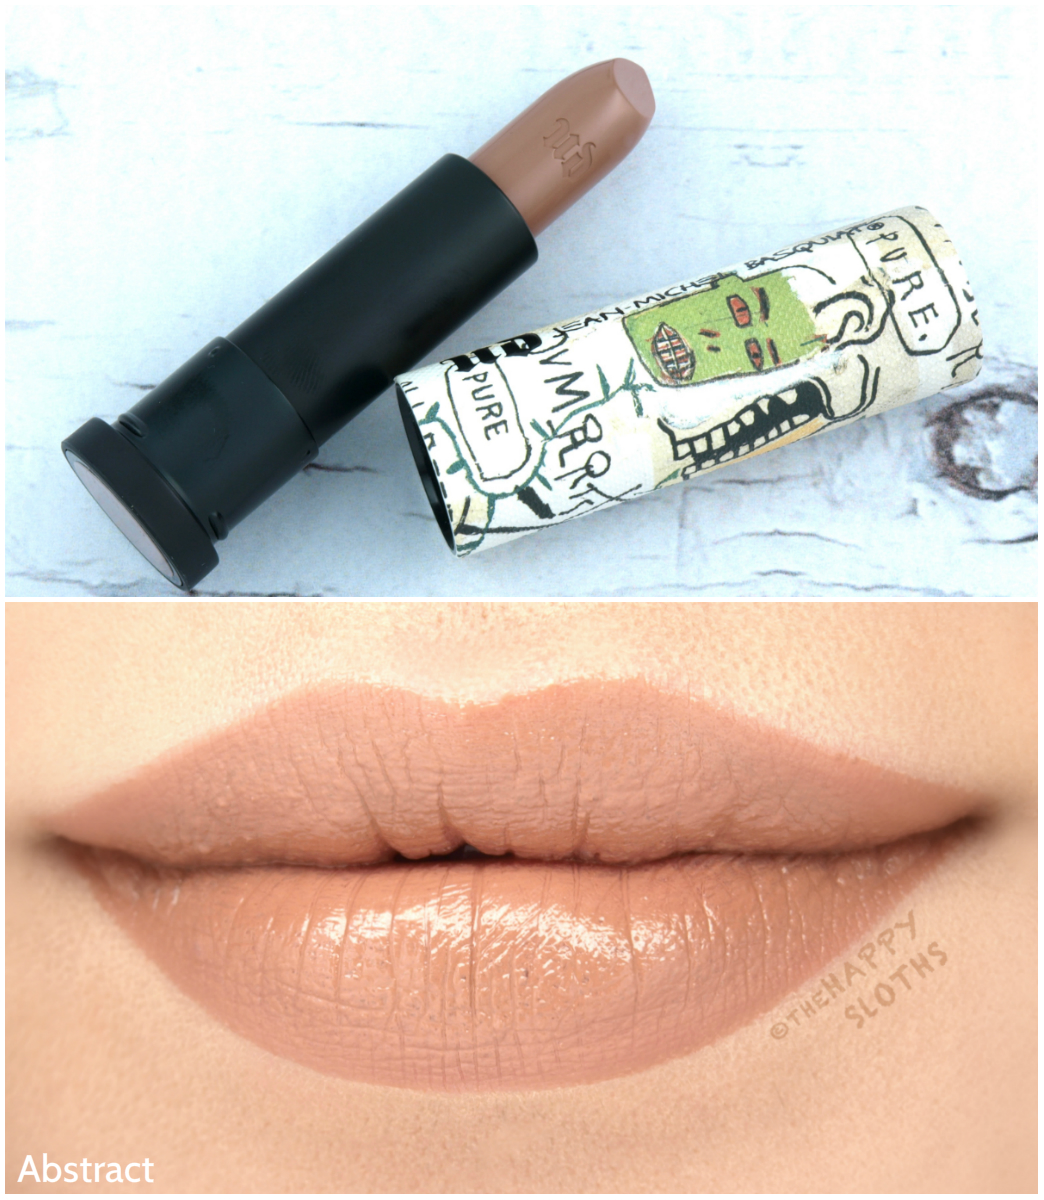 Urban Decay x Basquiat Lipstick in "Abstract": Review and Swatches